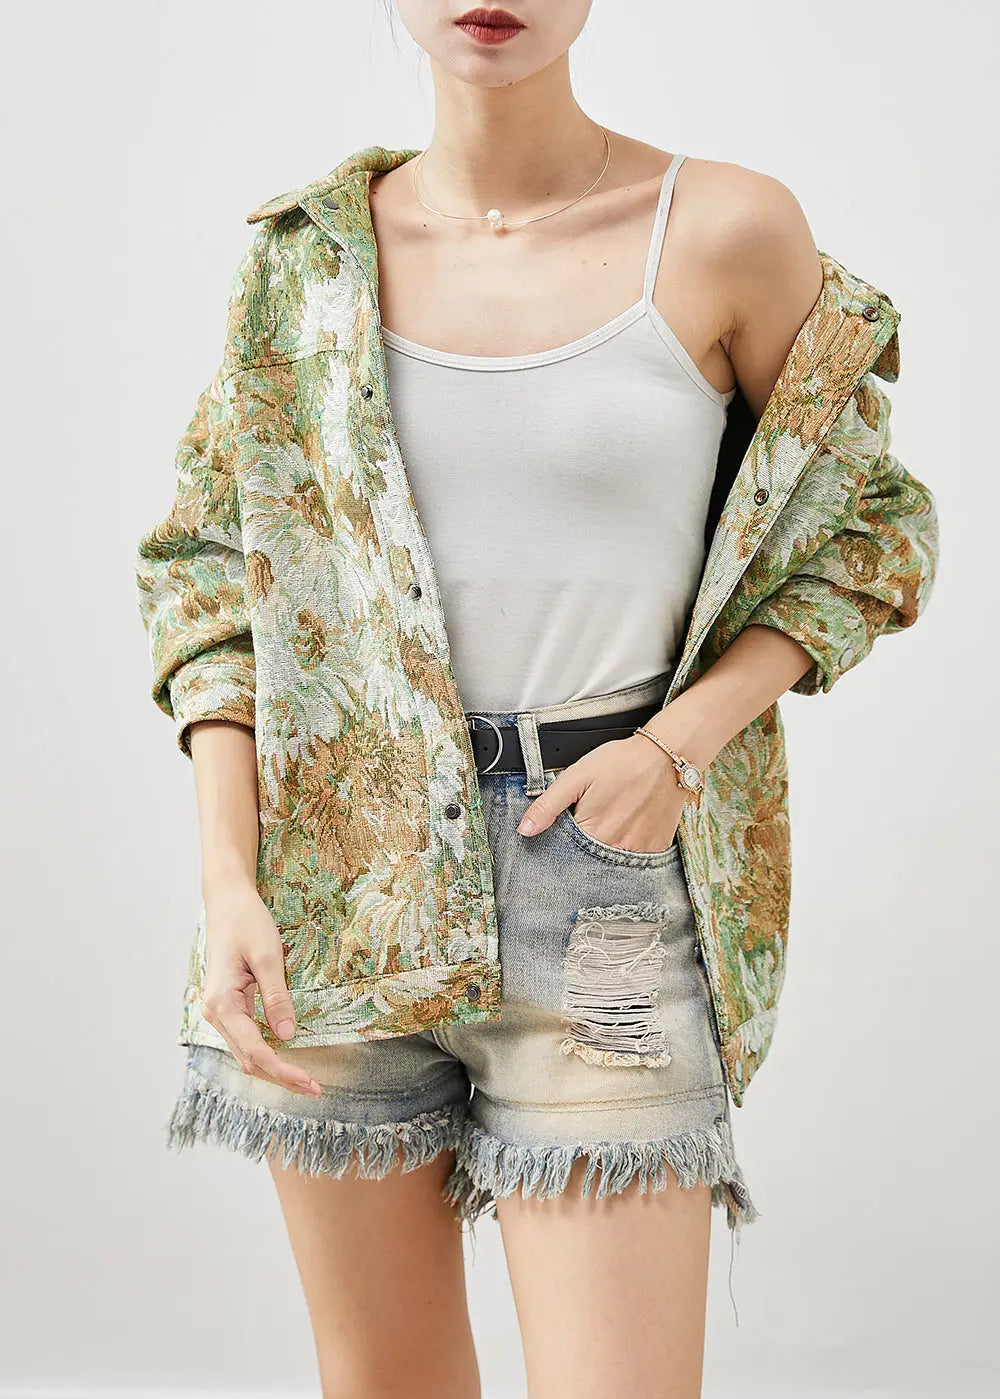 Boutique Green Oversized Floral Painting Denim Coat Fall Ada Fashion